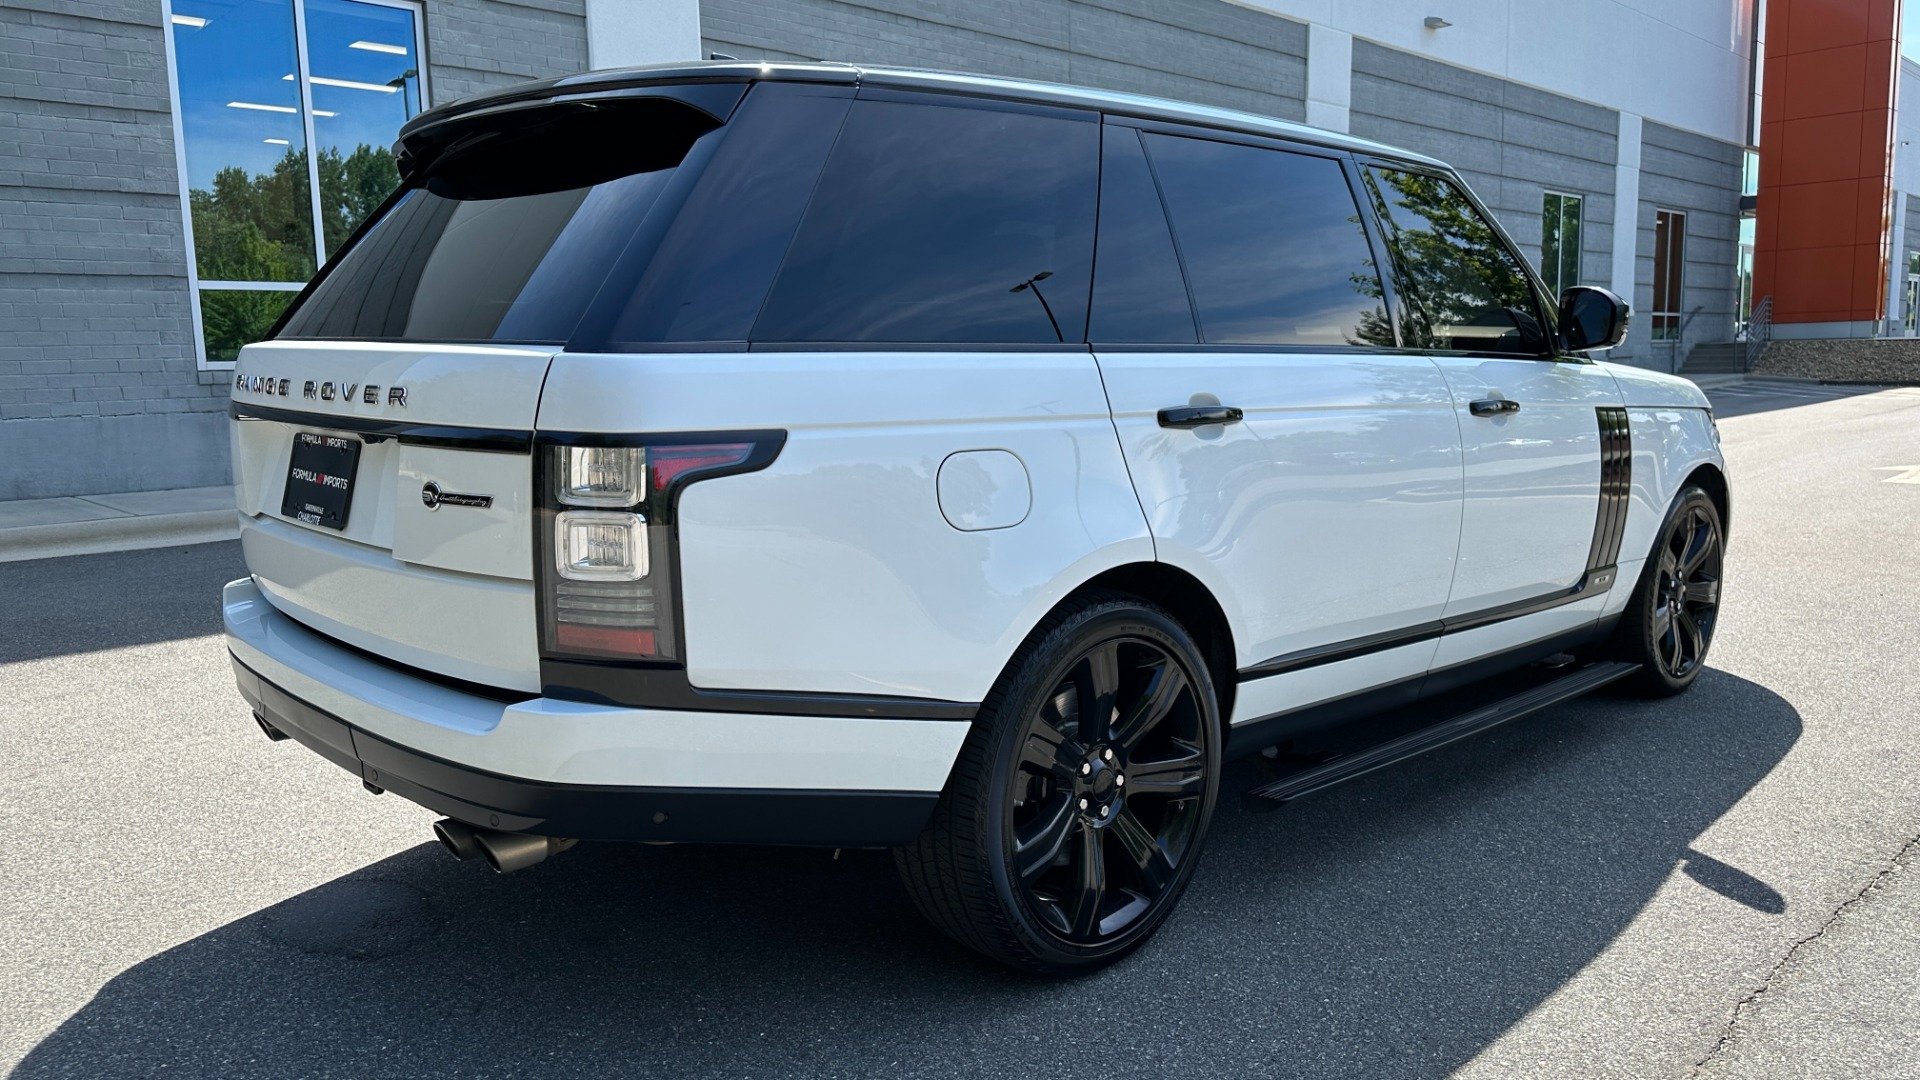 Used 2017 Land Rover Range Rover SV AUTOBIOGRAPHY / LOADED / REAR MASSAGE / EXECUTIVE SEATING / LWB for sale $75,900 at Formula Imports in Charlotte NC 28227 8